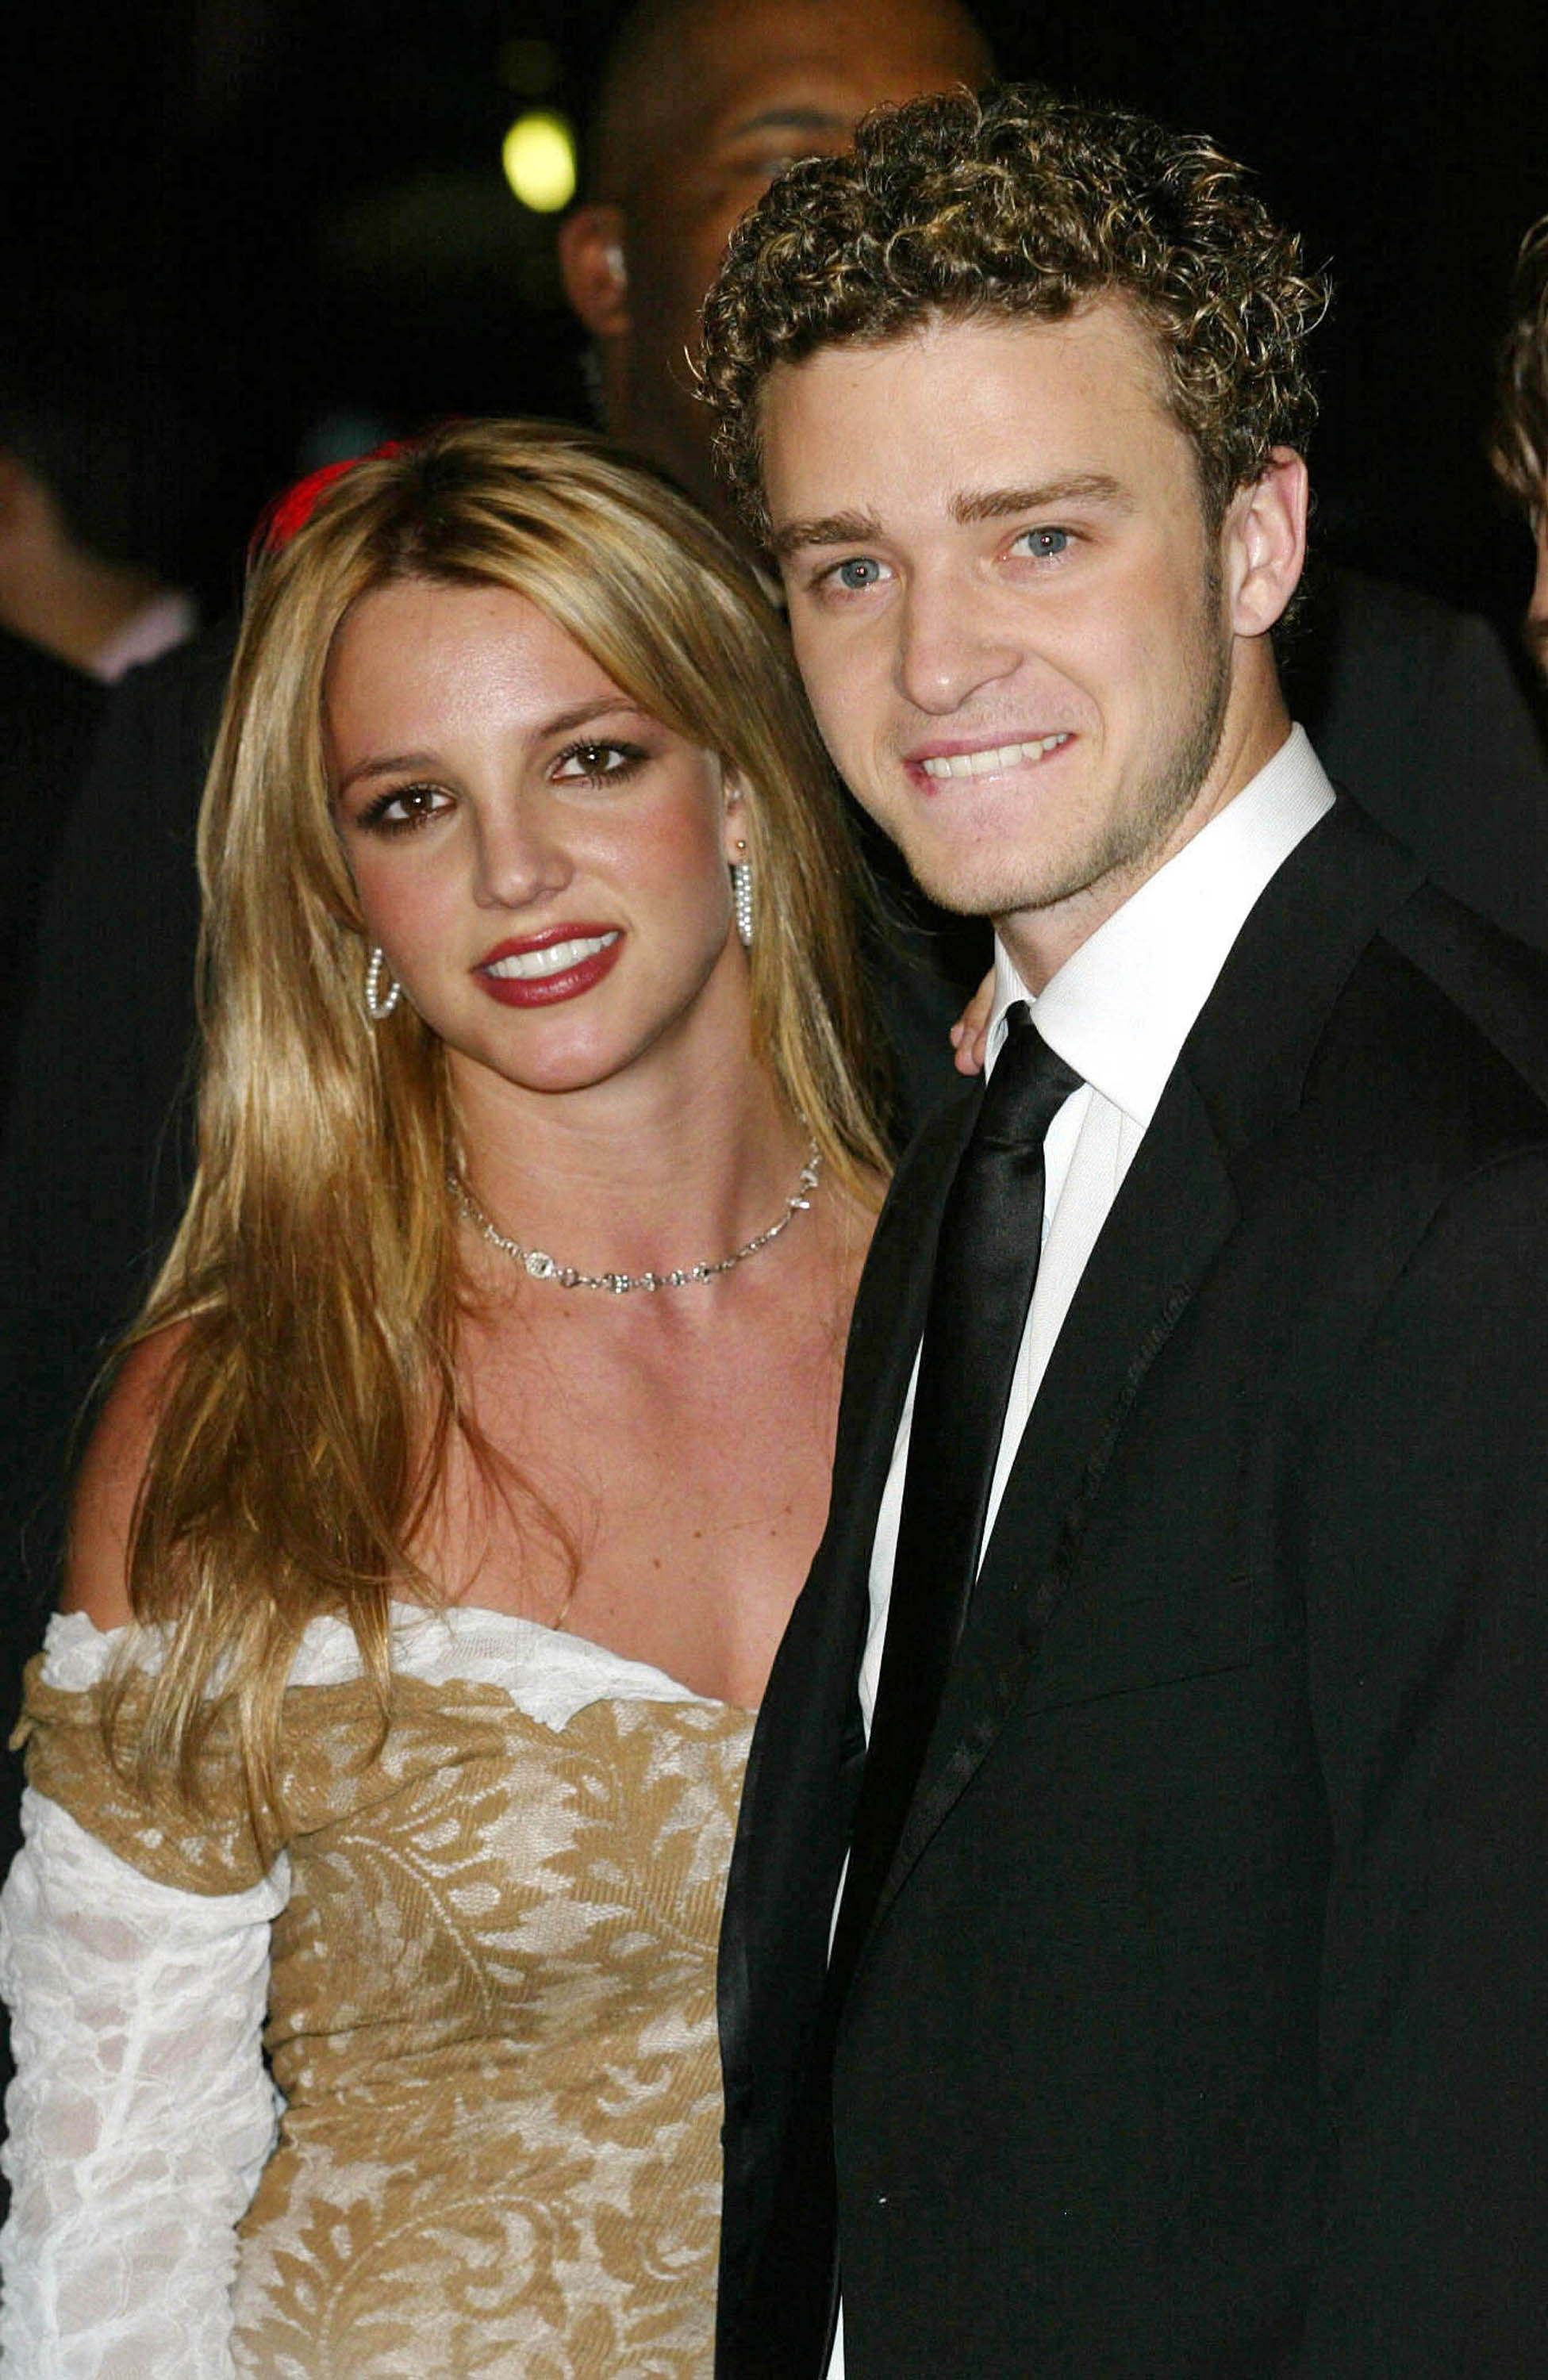 Britney Spears and Justin Timberlake at the Clive Davis pre Grammy party in los Angeles, California on February 26, 2002 | Source: Getty Images